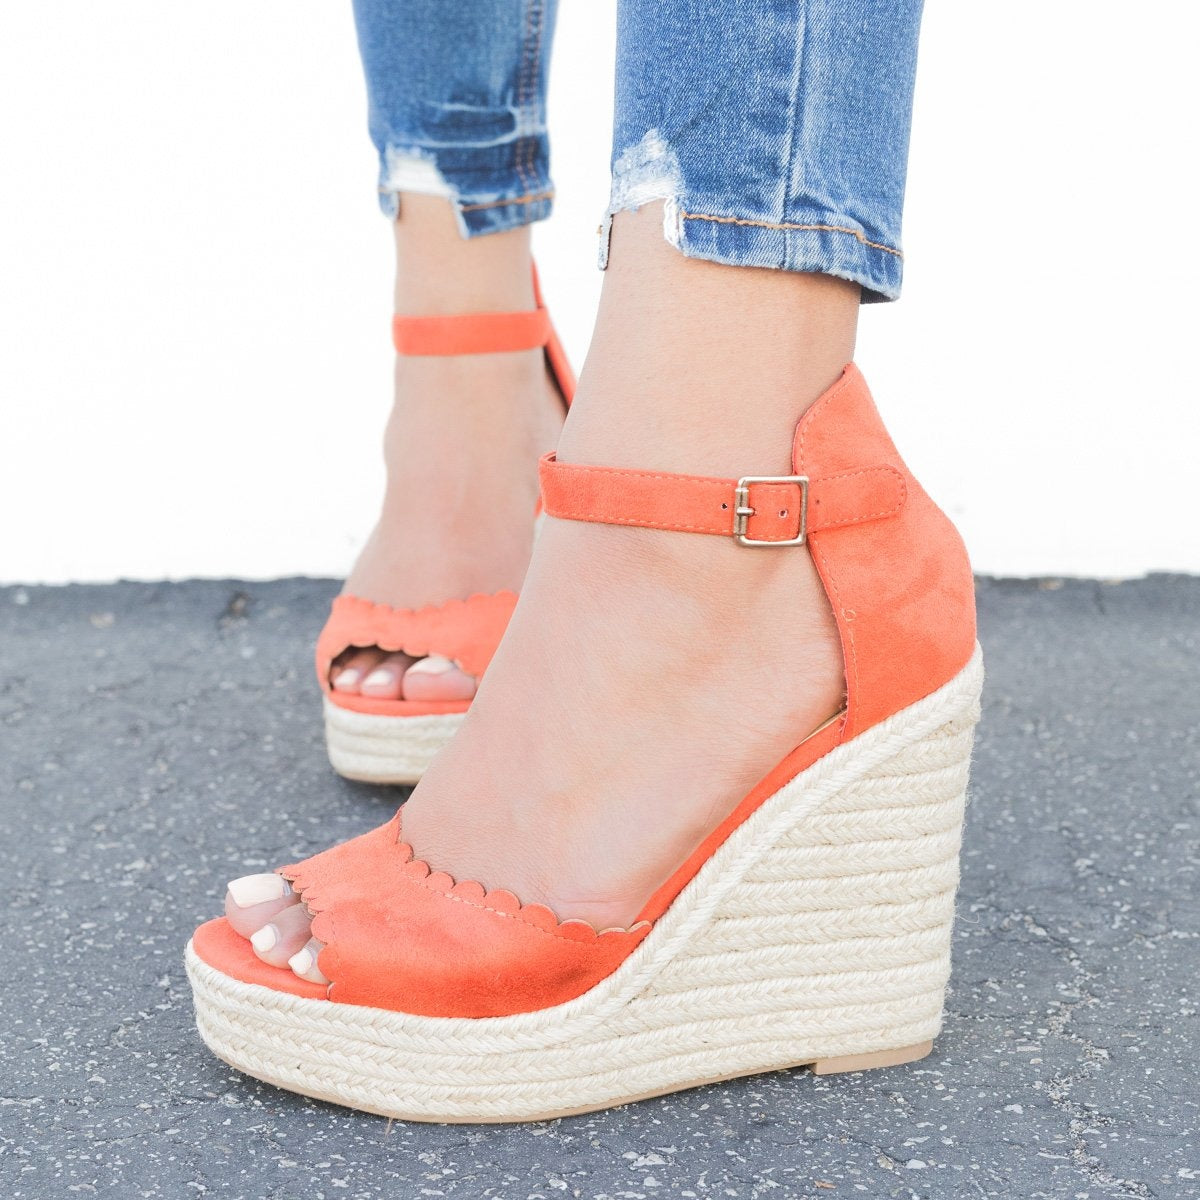 Chic Scalloped Espadrille Wedges 